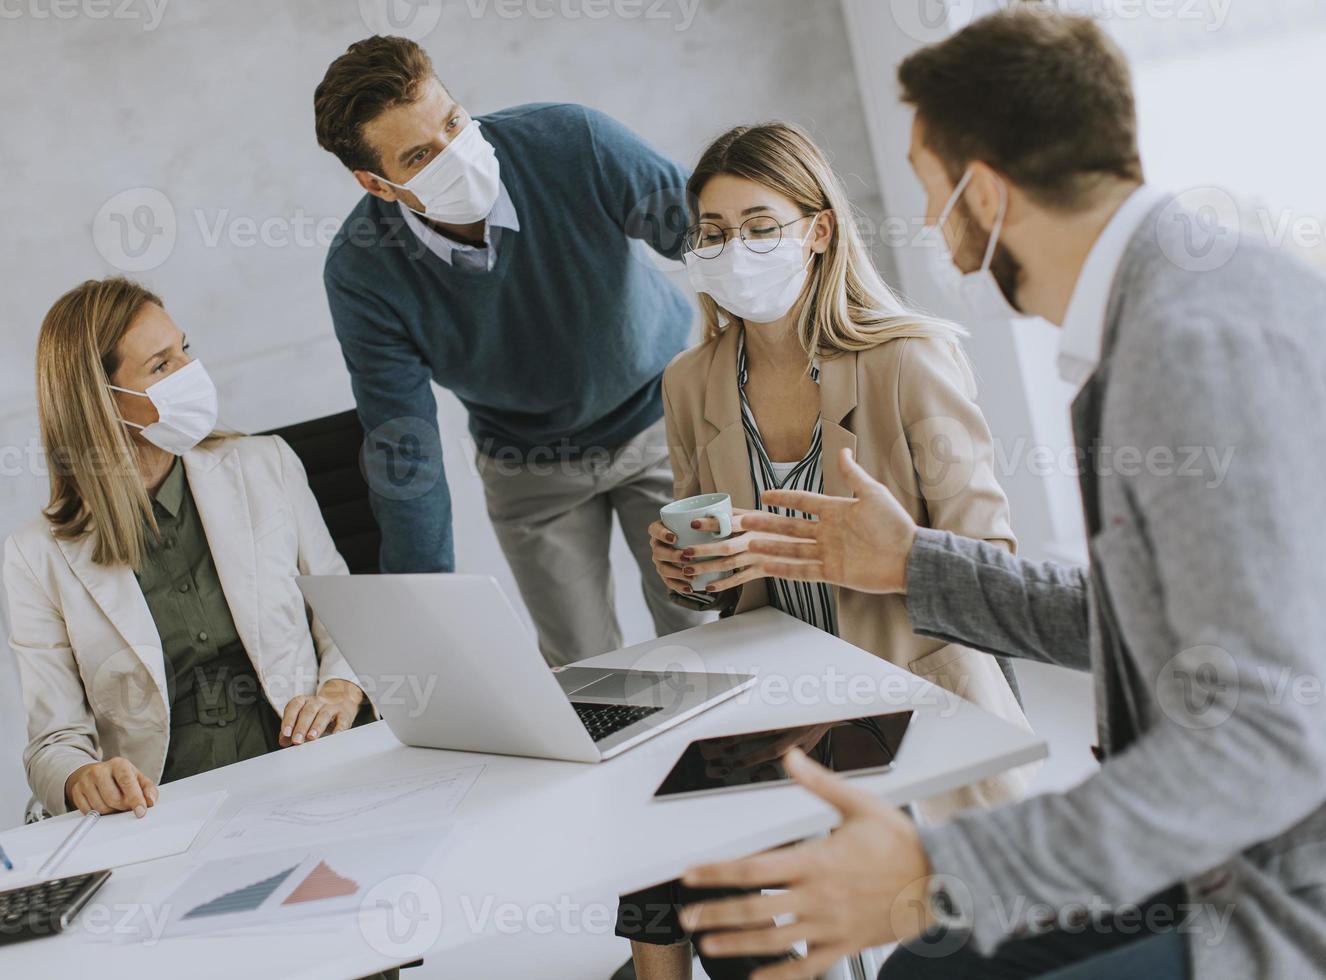 Professionals in discussion with masks on photo